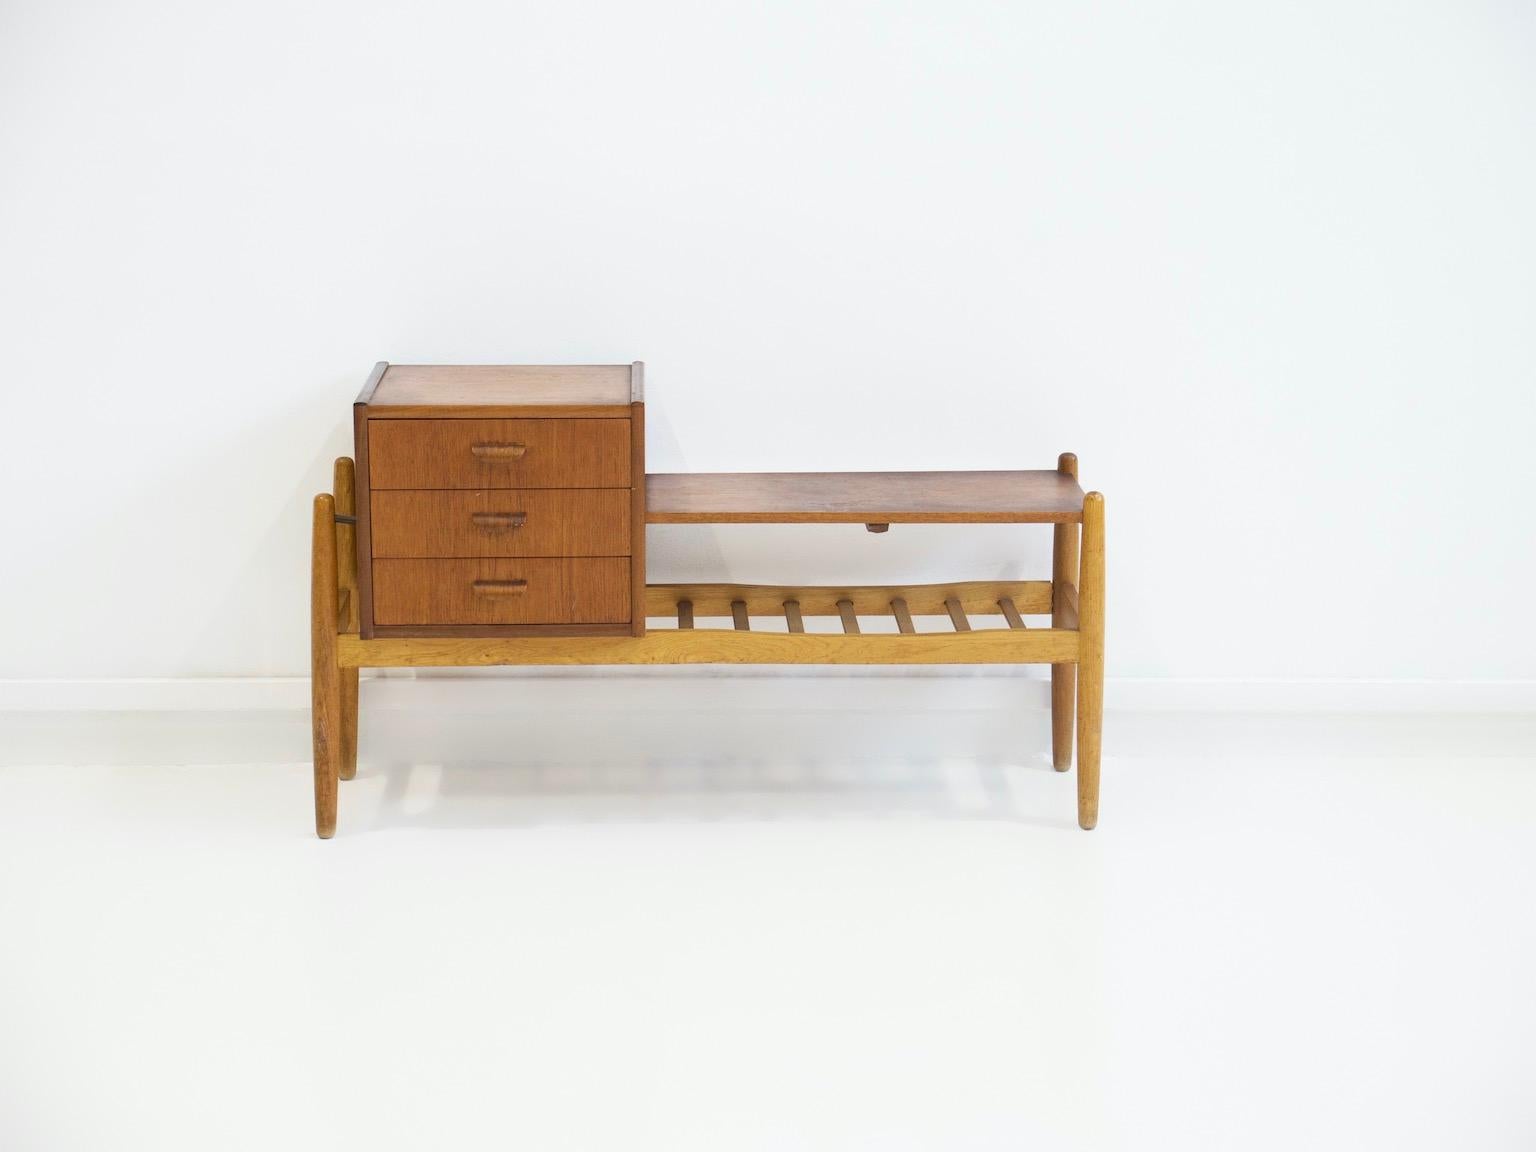 Small side or console table with a rack for shoes, a shelf and three drawers. Made of veneered teak and oak. Round tapered legs and brass details. Designed by Arne Wahl Iversen and manufactured in Denmark. Great piece for the entrance or hallway.